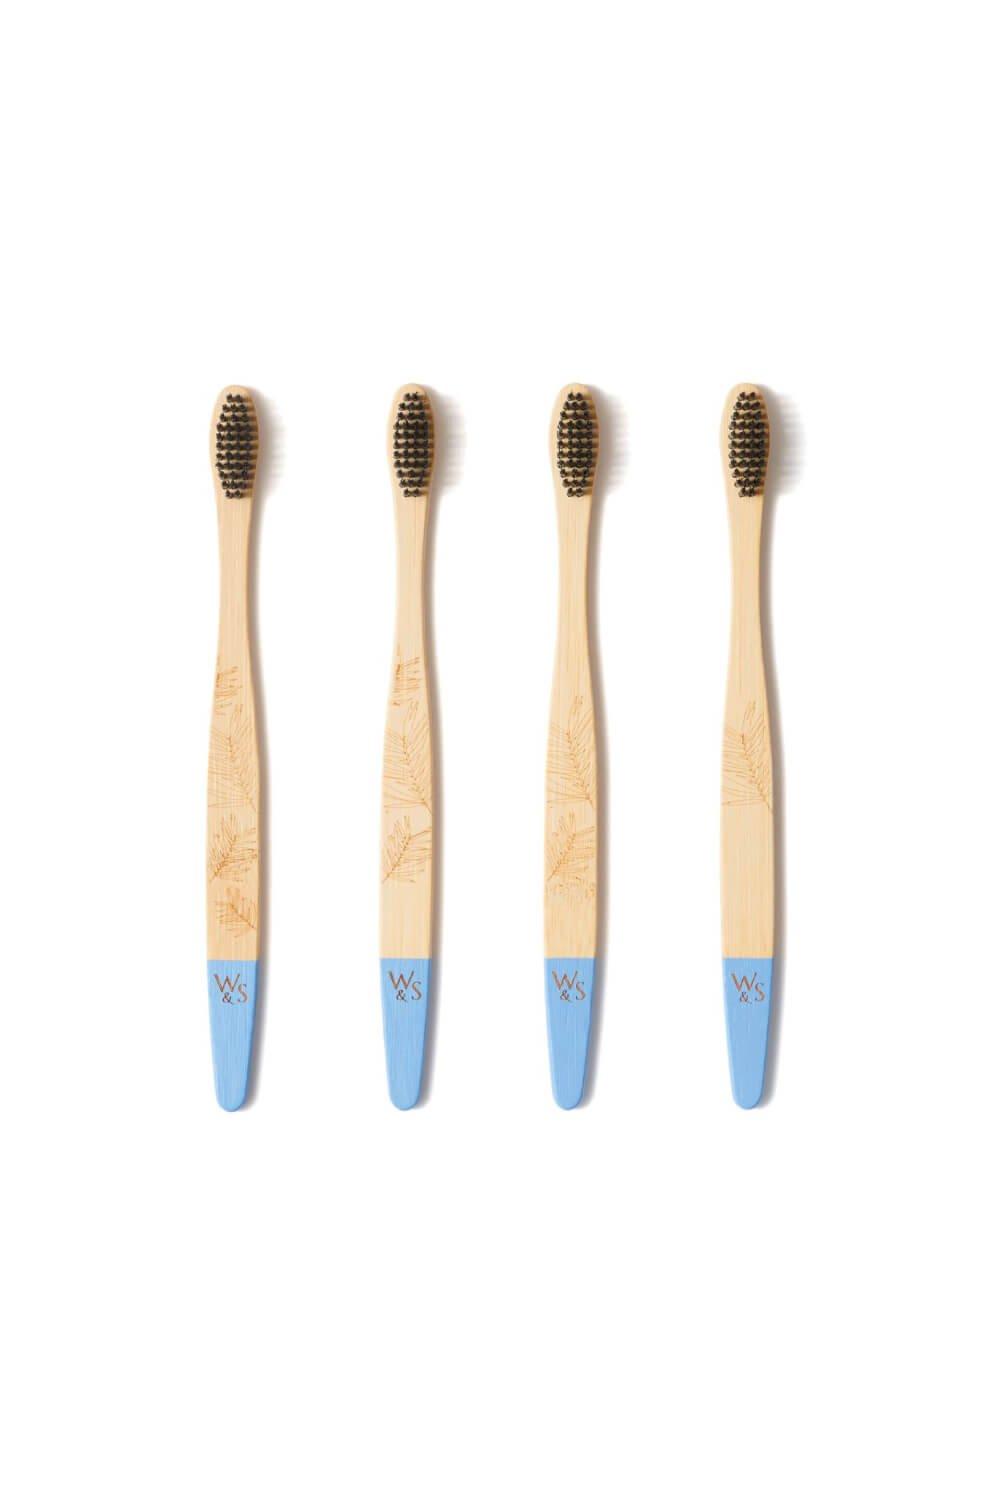 Bamboo Toothbrushes Adult Firm Bristles 4 Pack